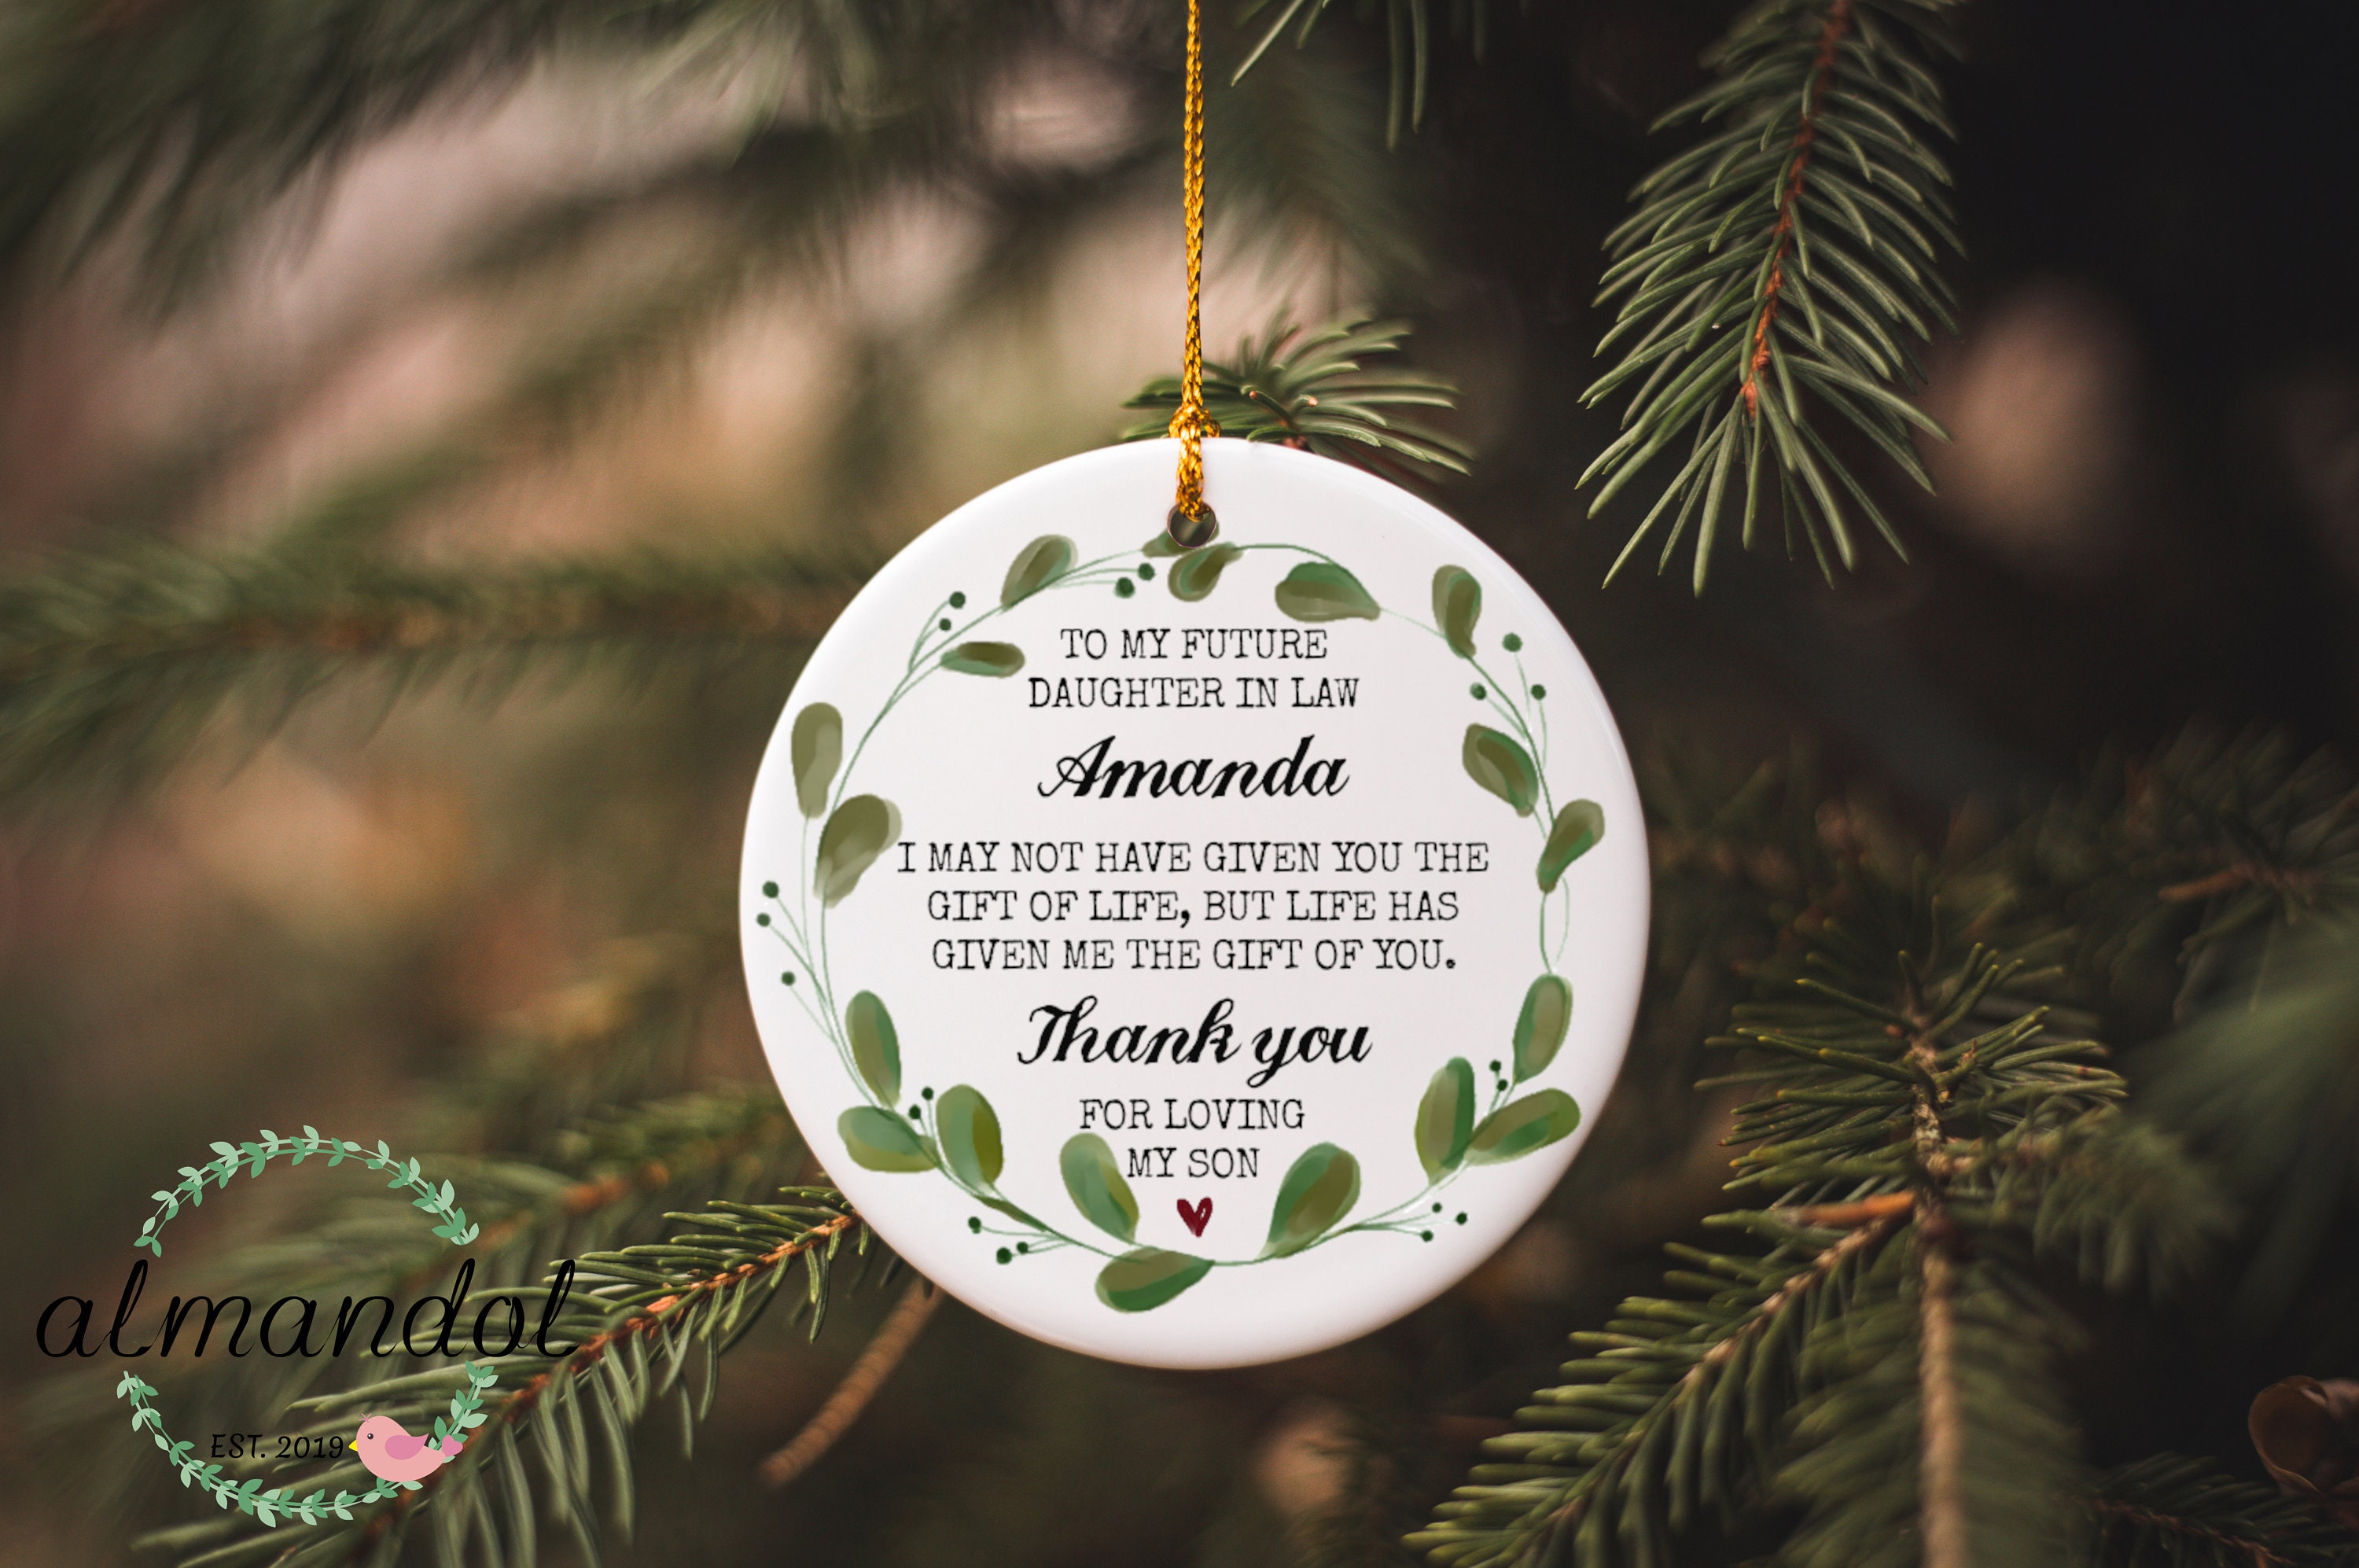  DIGIBUDDHA Mother In Law Gifts Ornament Gift Christmas Mother's  Day Wedding Present Thank You For Raising The Man of My Dreams from Bride  Daughter In-Law 3 Flat Circle Ceramic with Ribbon